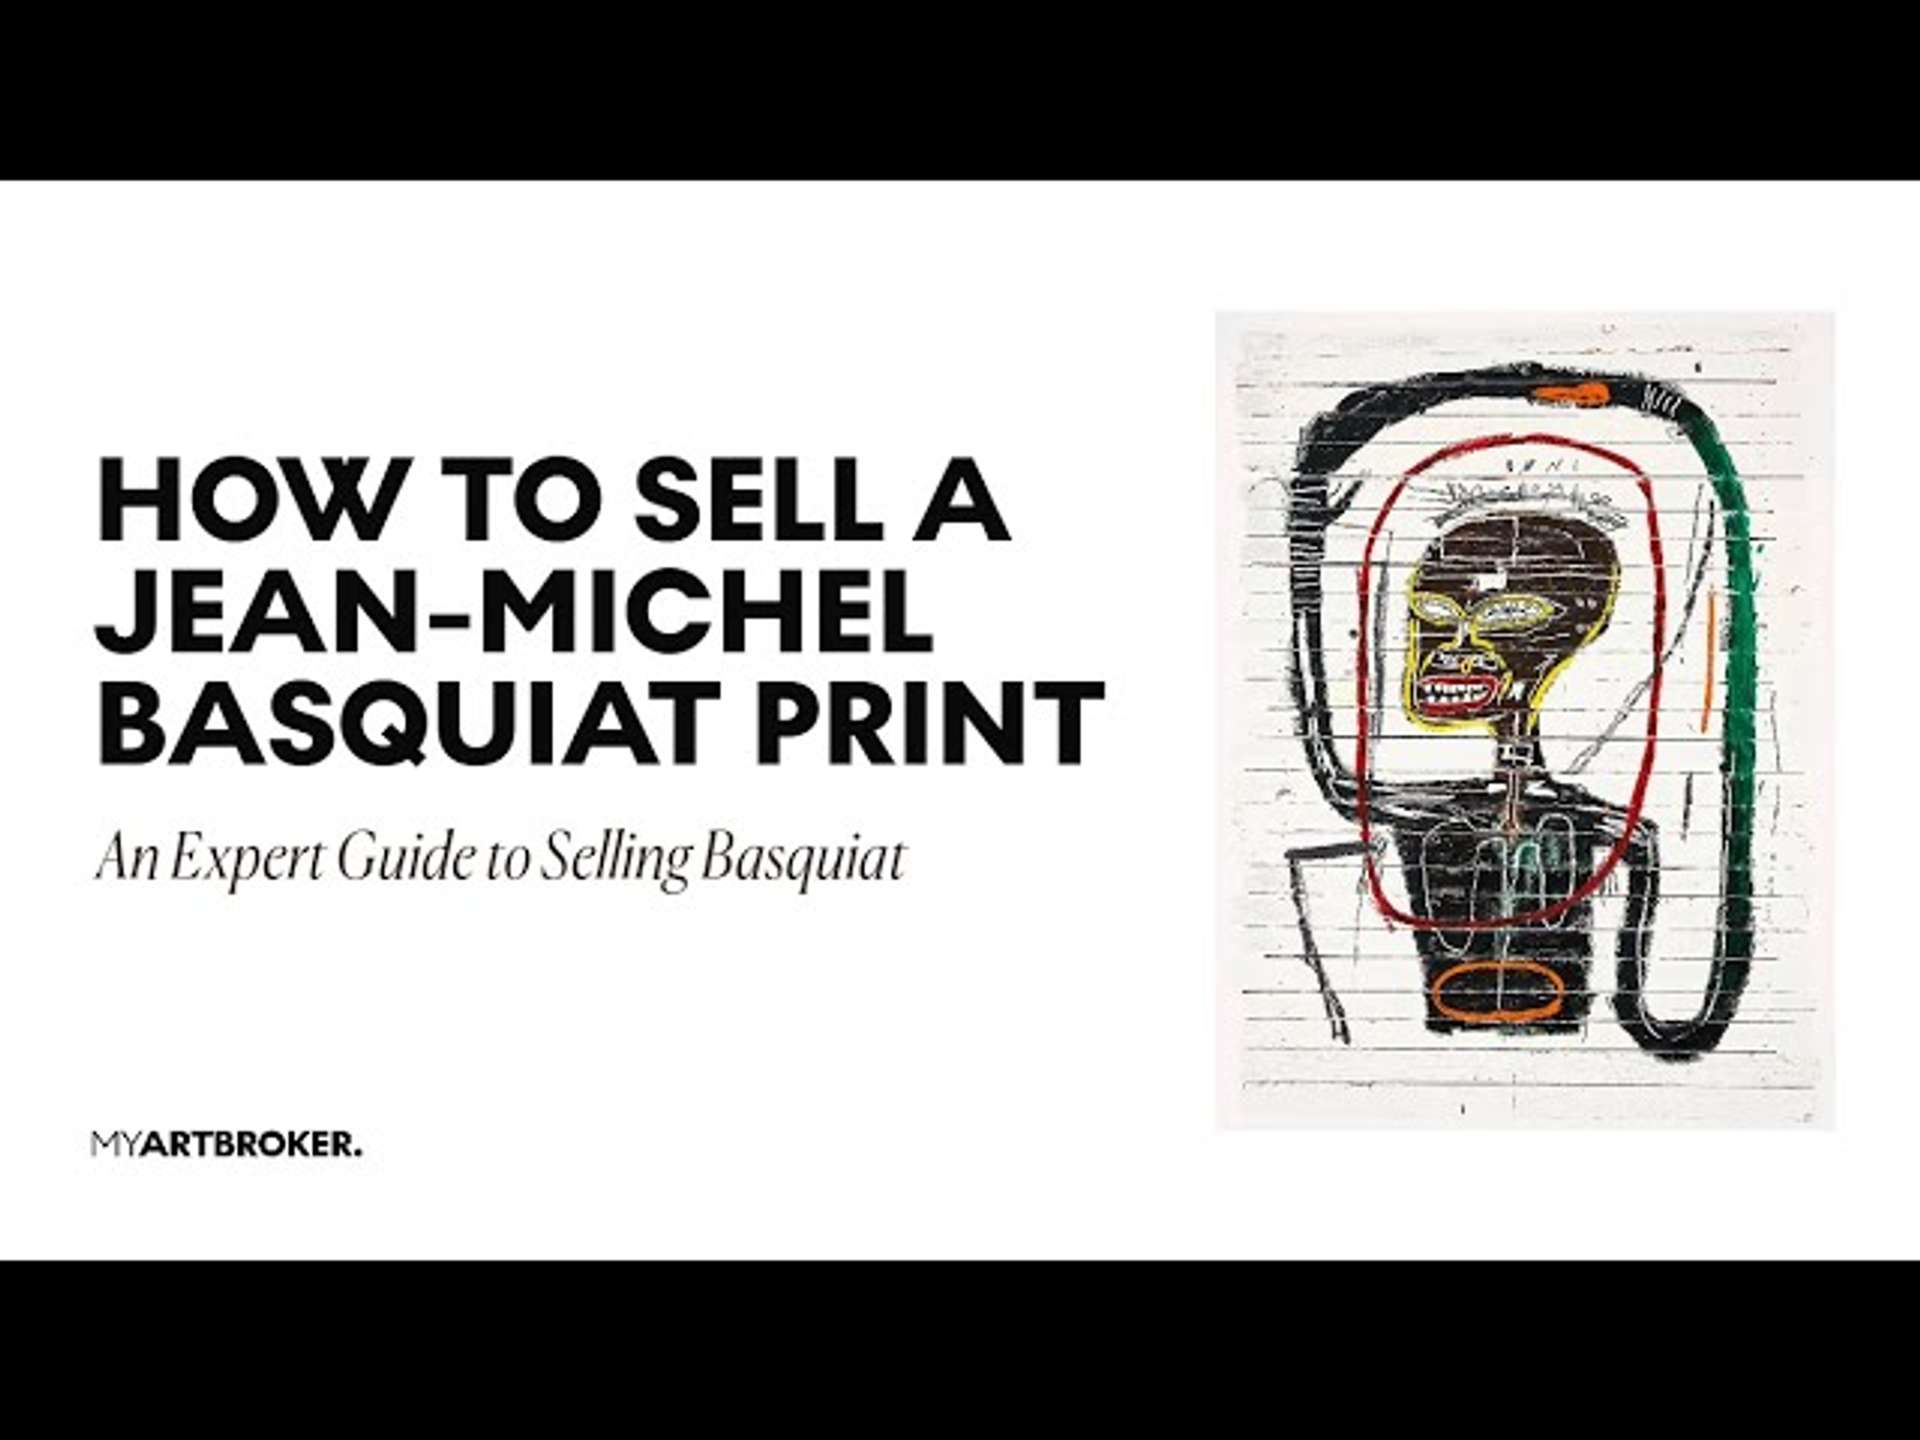 A Seller’s Guide To Jean-Michel Basquiat